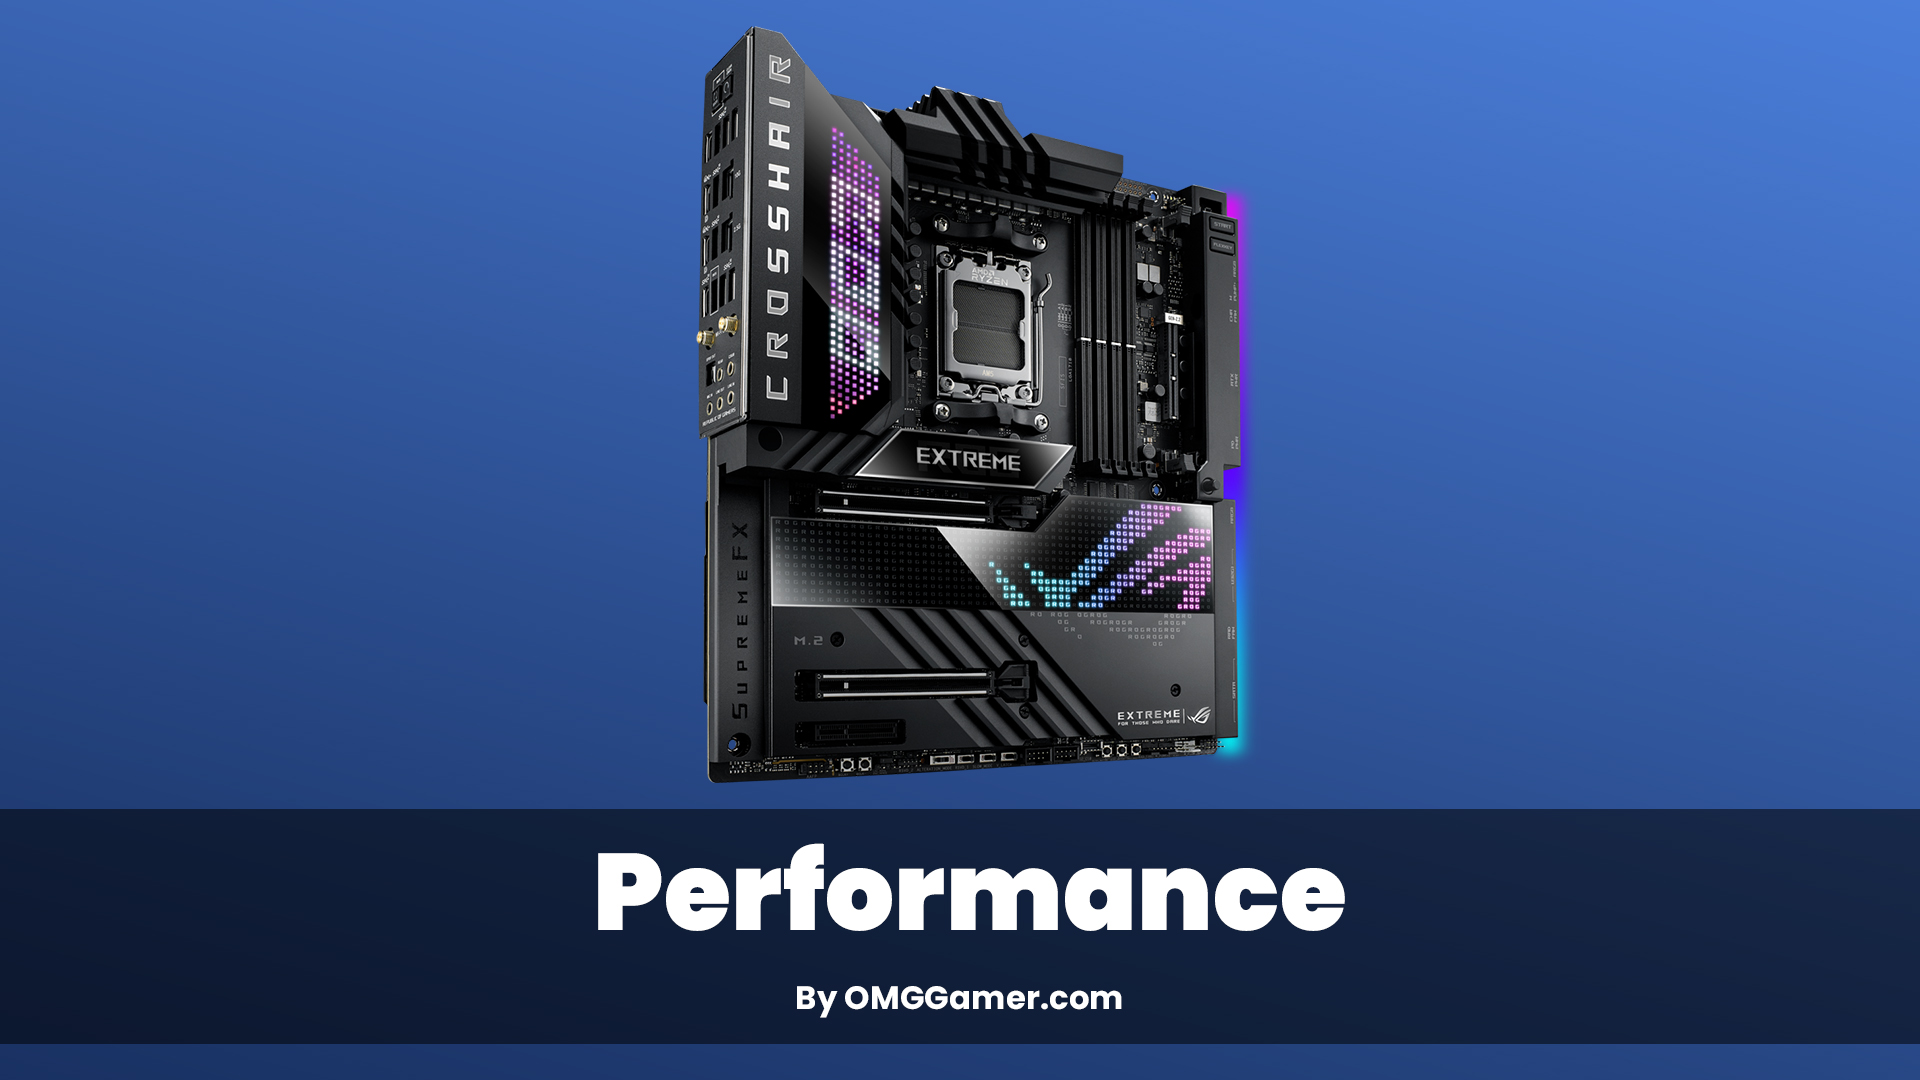 Performance of Asus ROG Crosshair X670E Motherboard